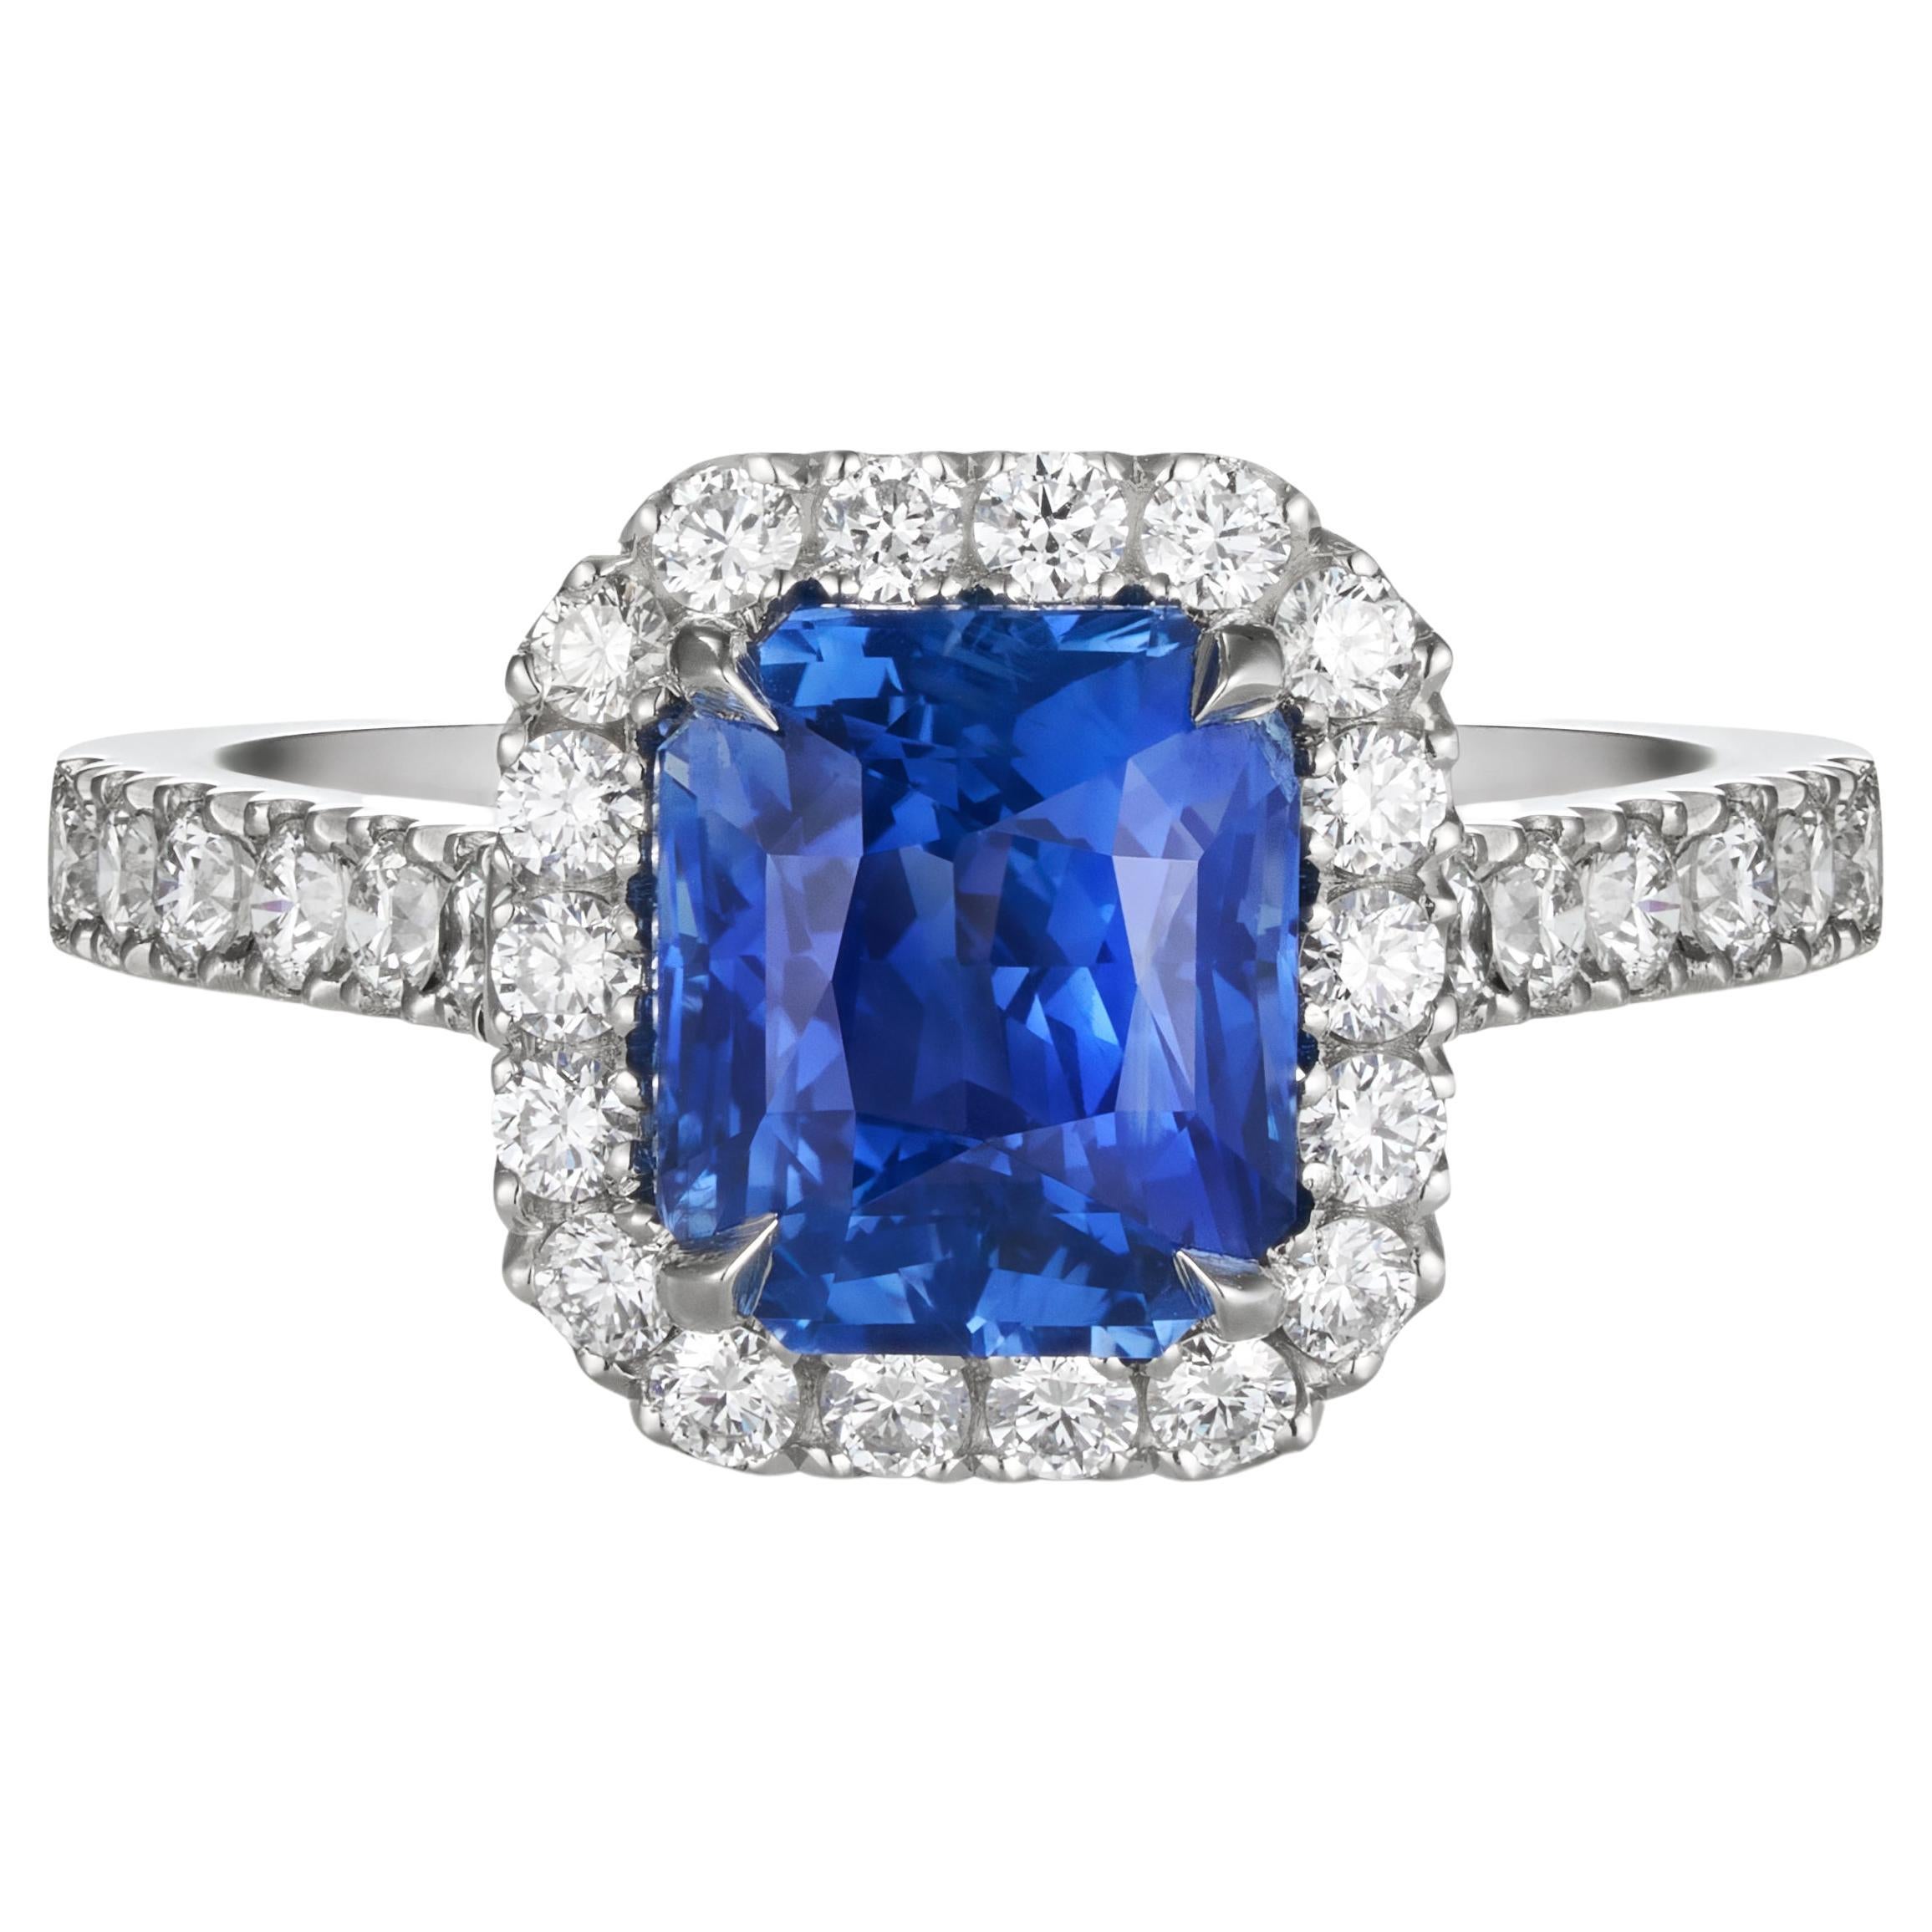 Certified 3 Carat Cornflower Blue Sapphire Diamond Ring 'Natural & Untreated' For Sale